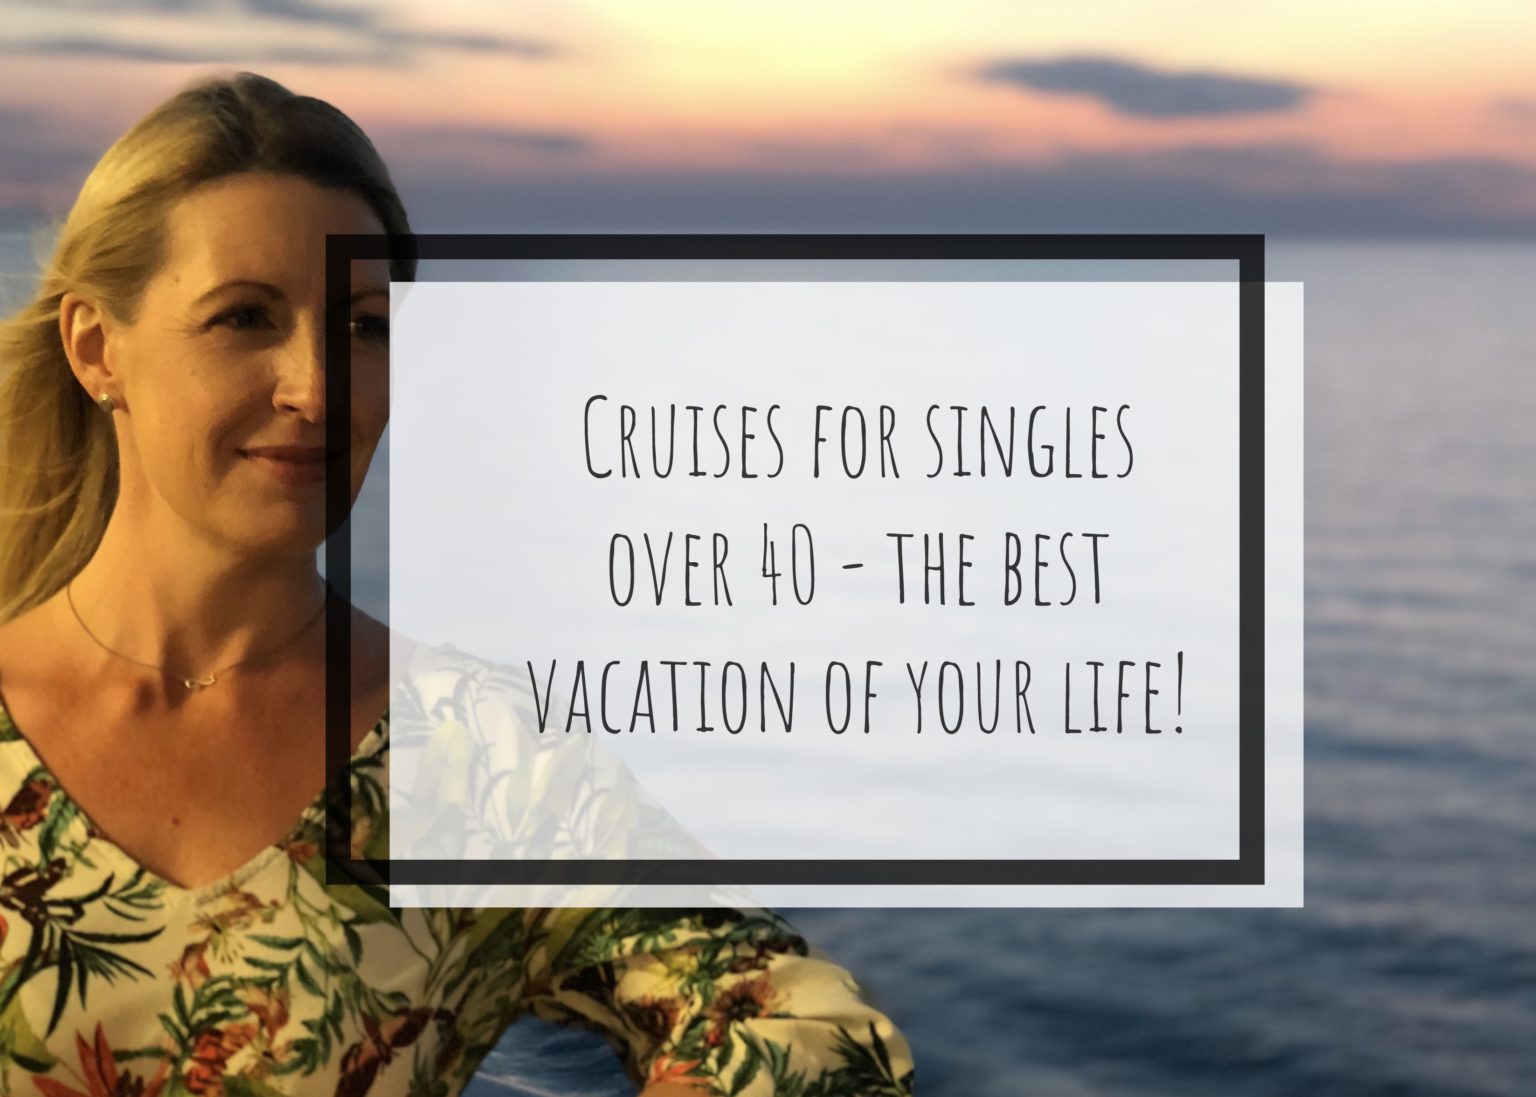 Cruises for singles over 40 the best vacation of your life! The